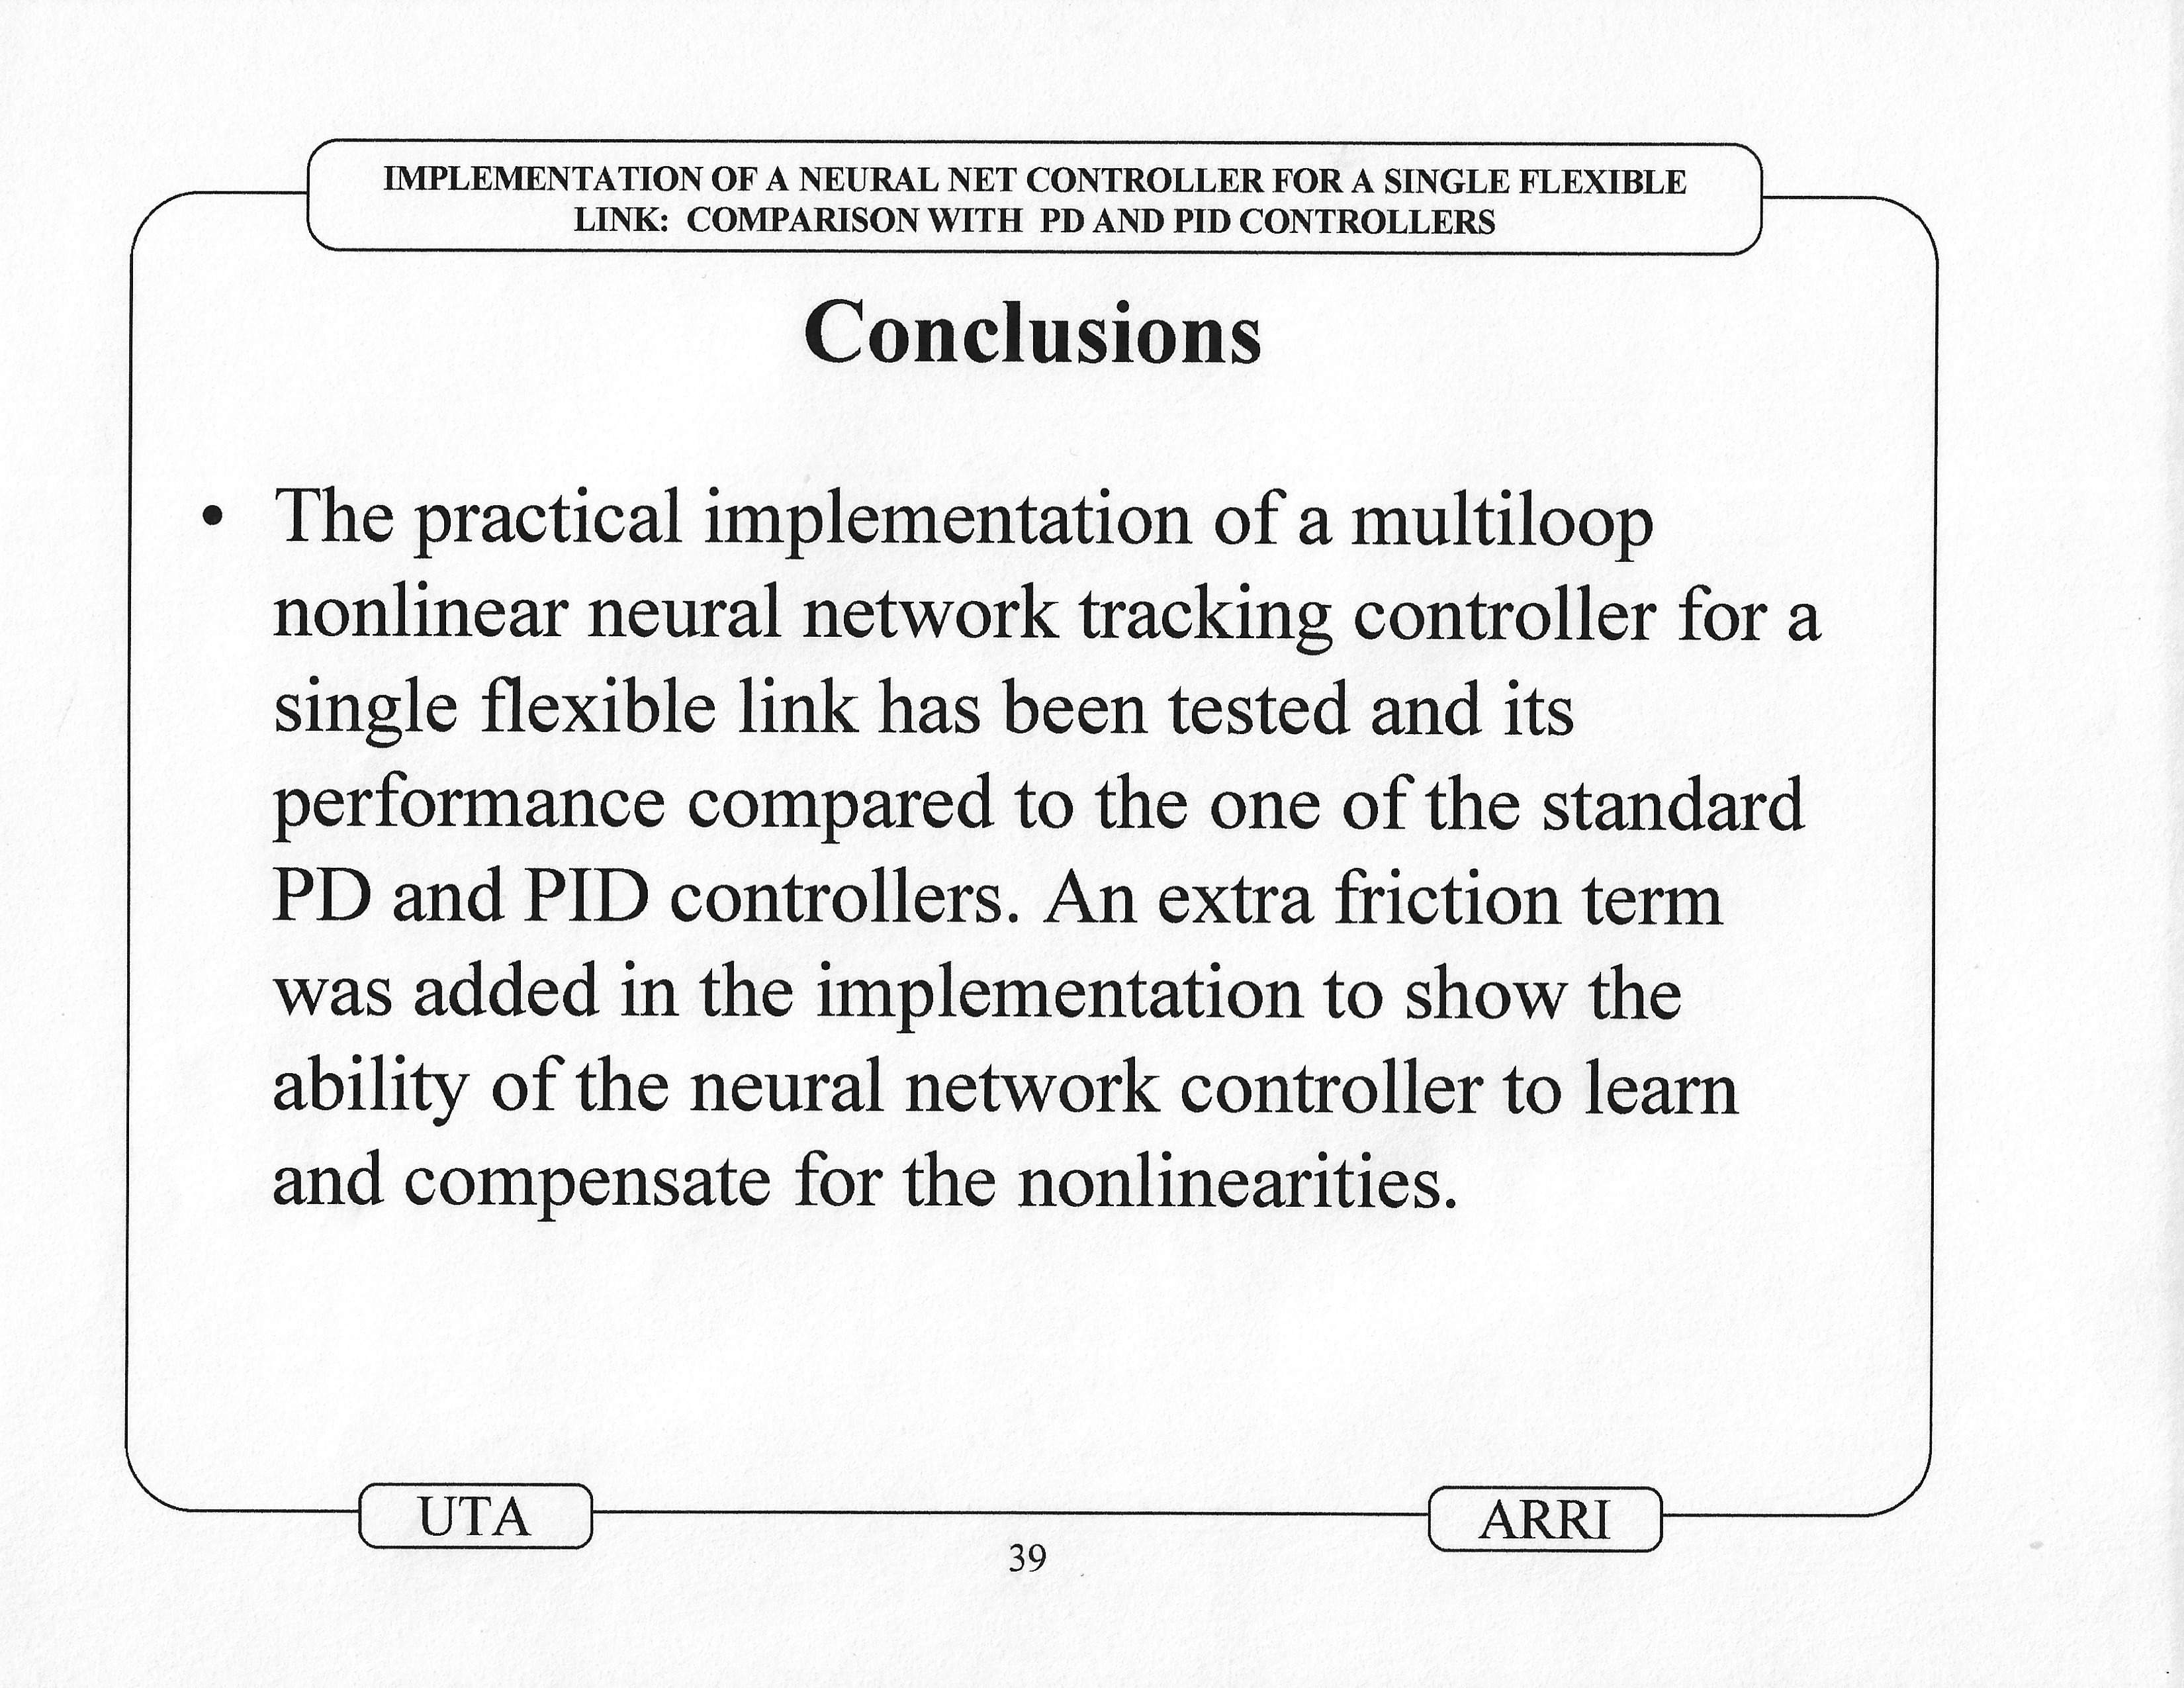 960724_Gutierrez_1996_Implementation_of_a_Neural_Net_Tracking_Controller_for_a_Single_Flexible_Link_Comparison_with_PD_and_PID_controllers_presentation_44